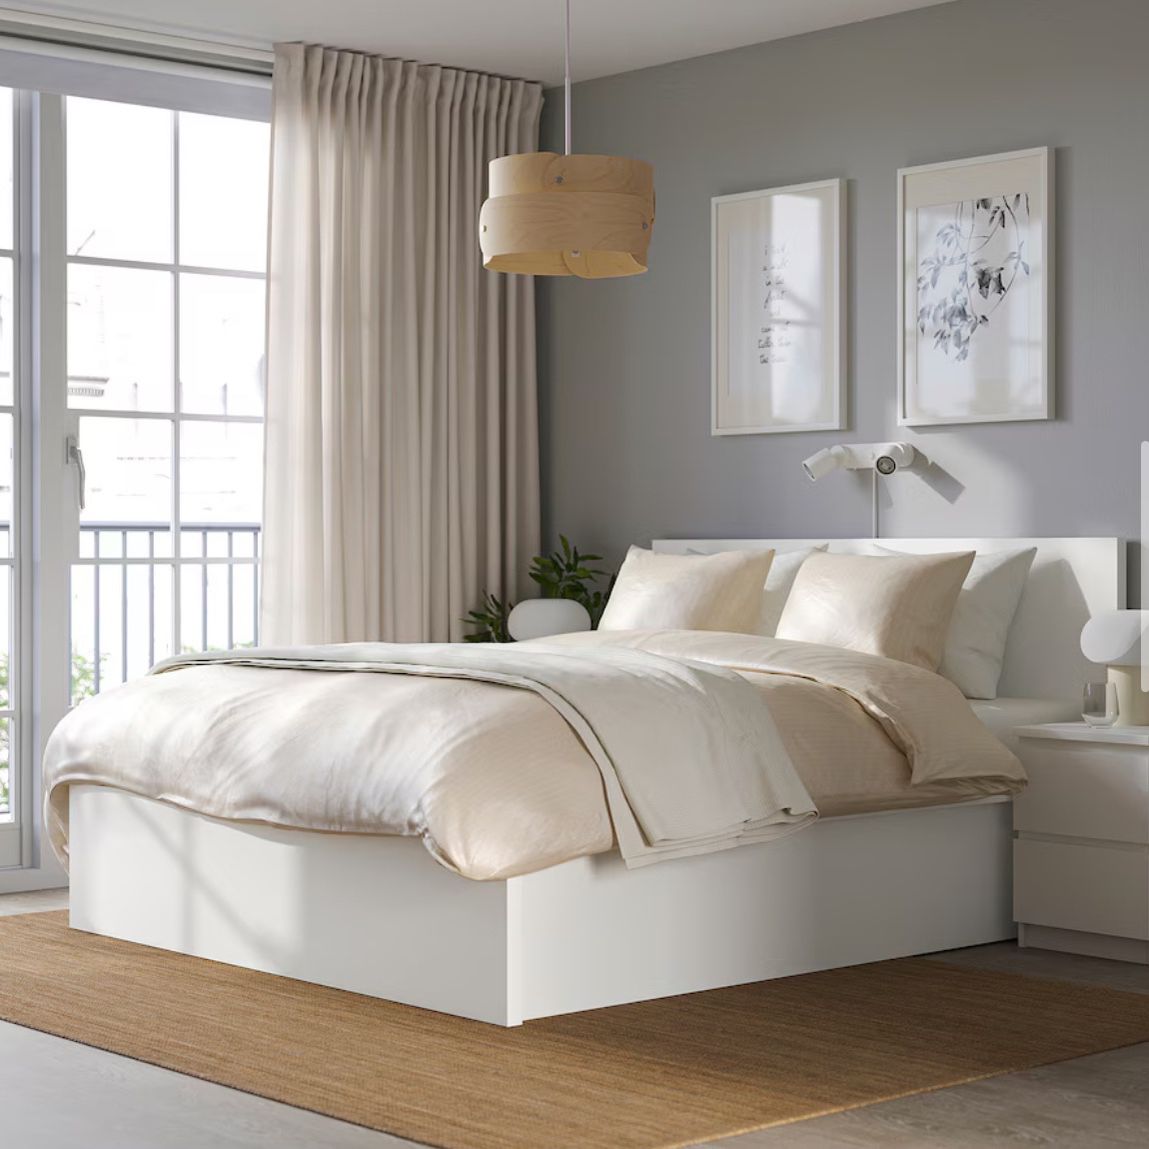 Ikea MALM Storage White Queen Bed ( come with matress)